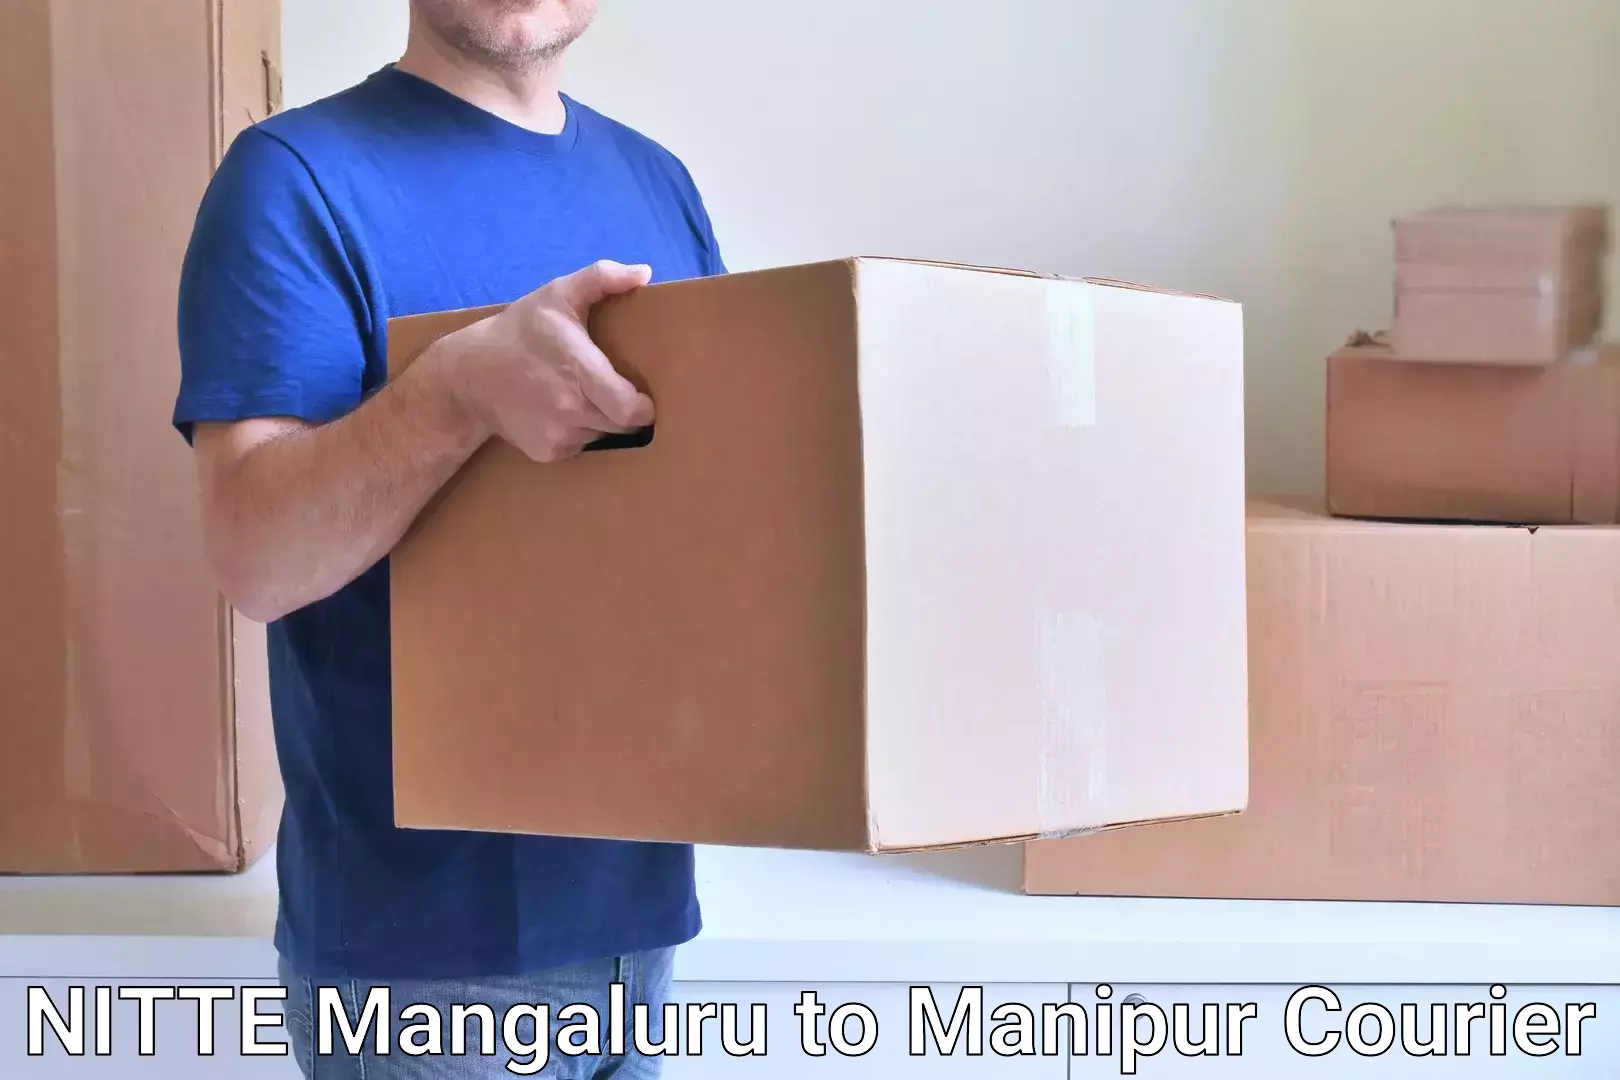 Cash on delivery service NITTE Mangaluru to Manipur